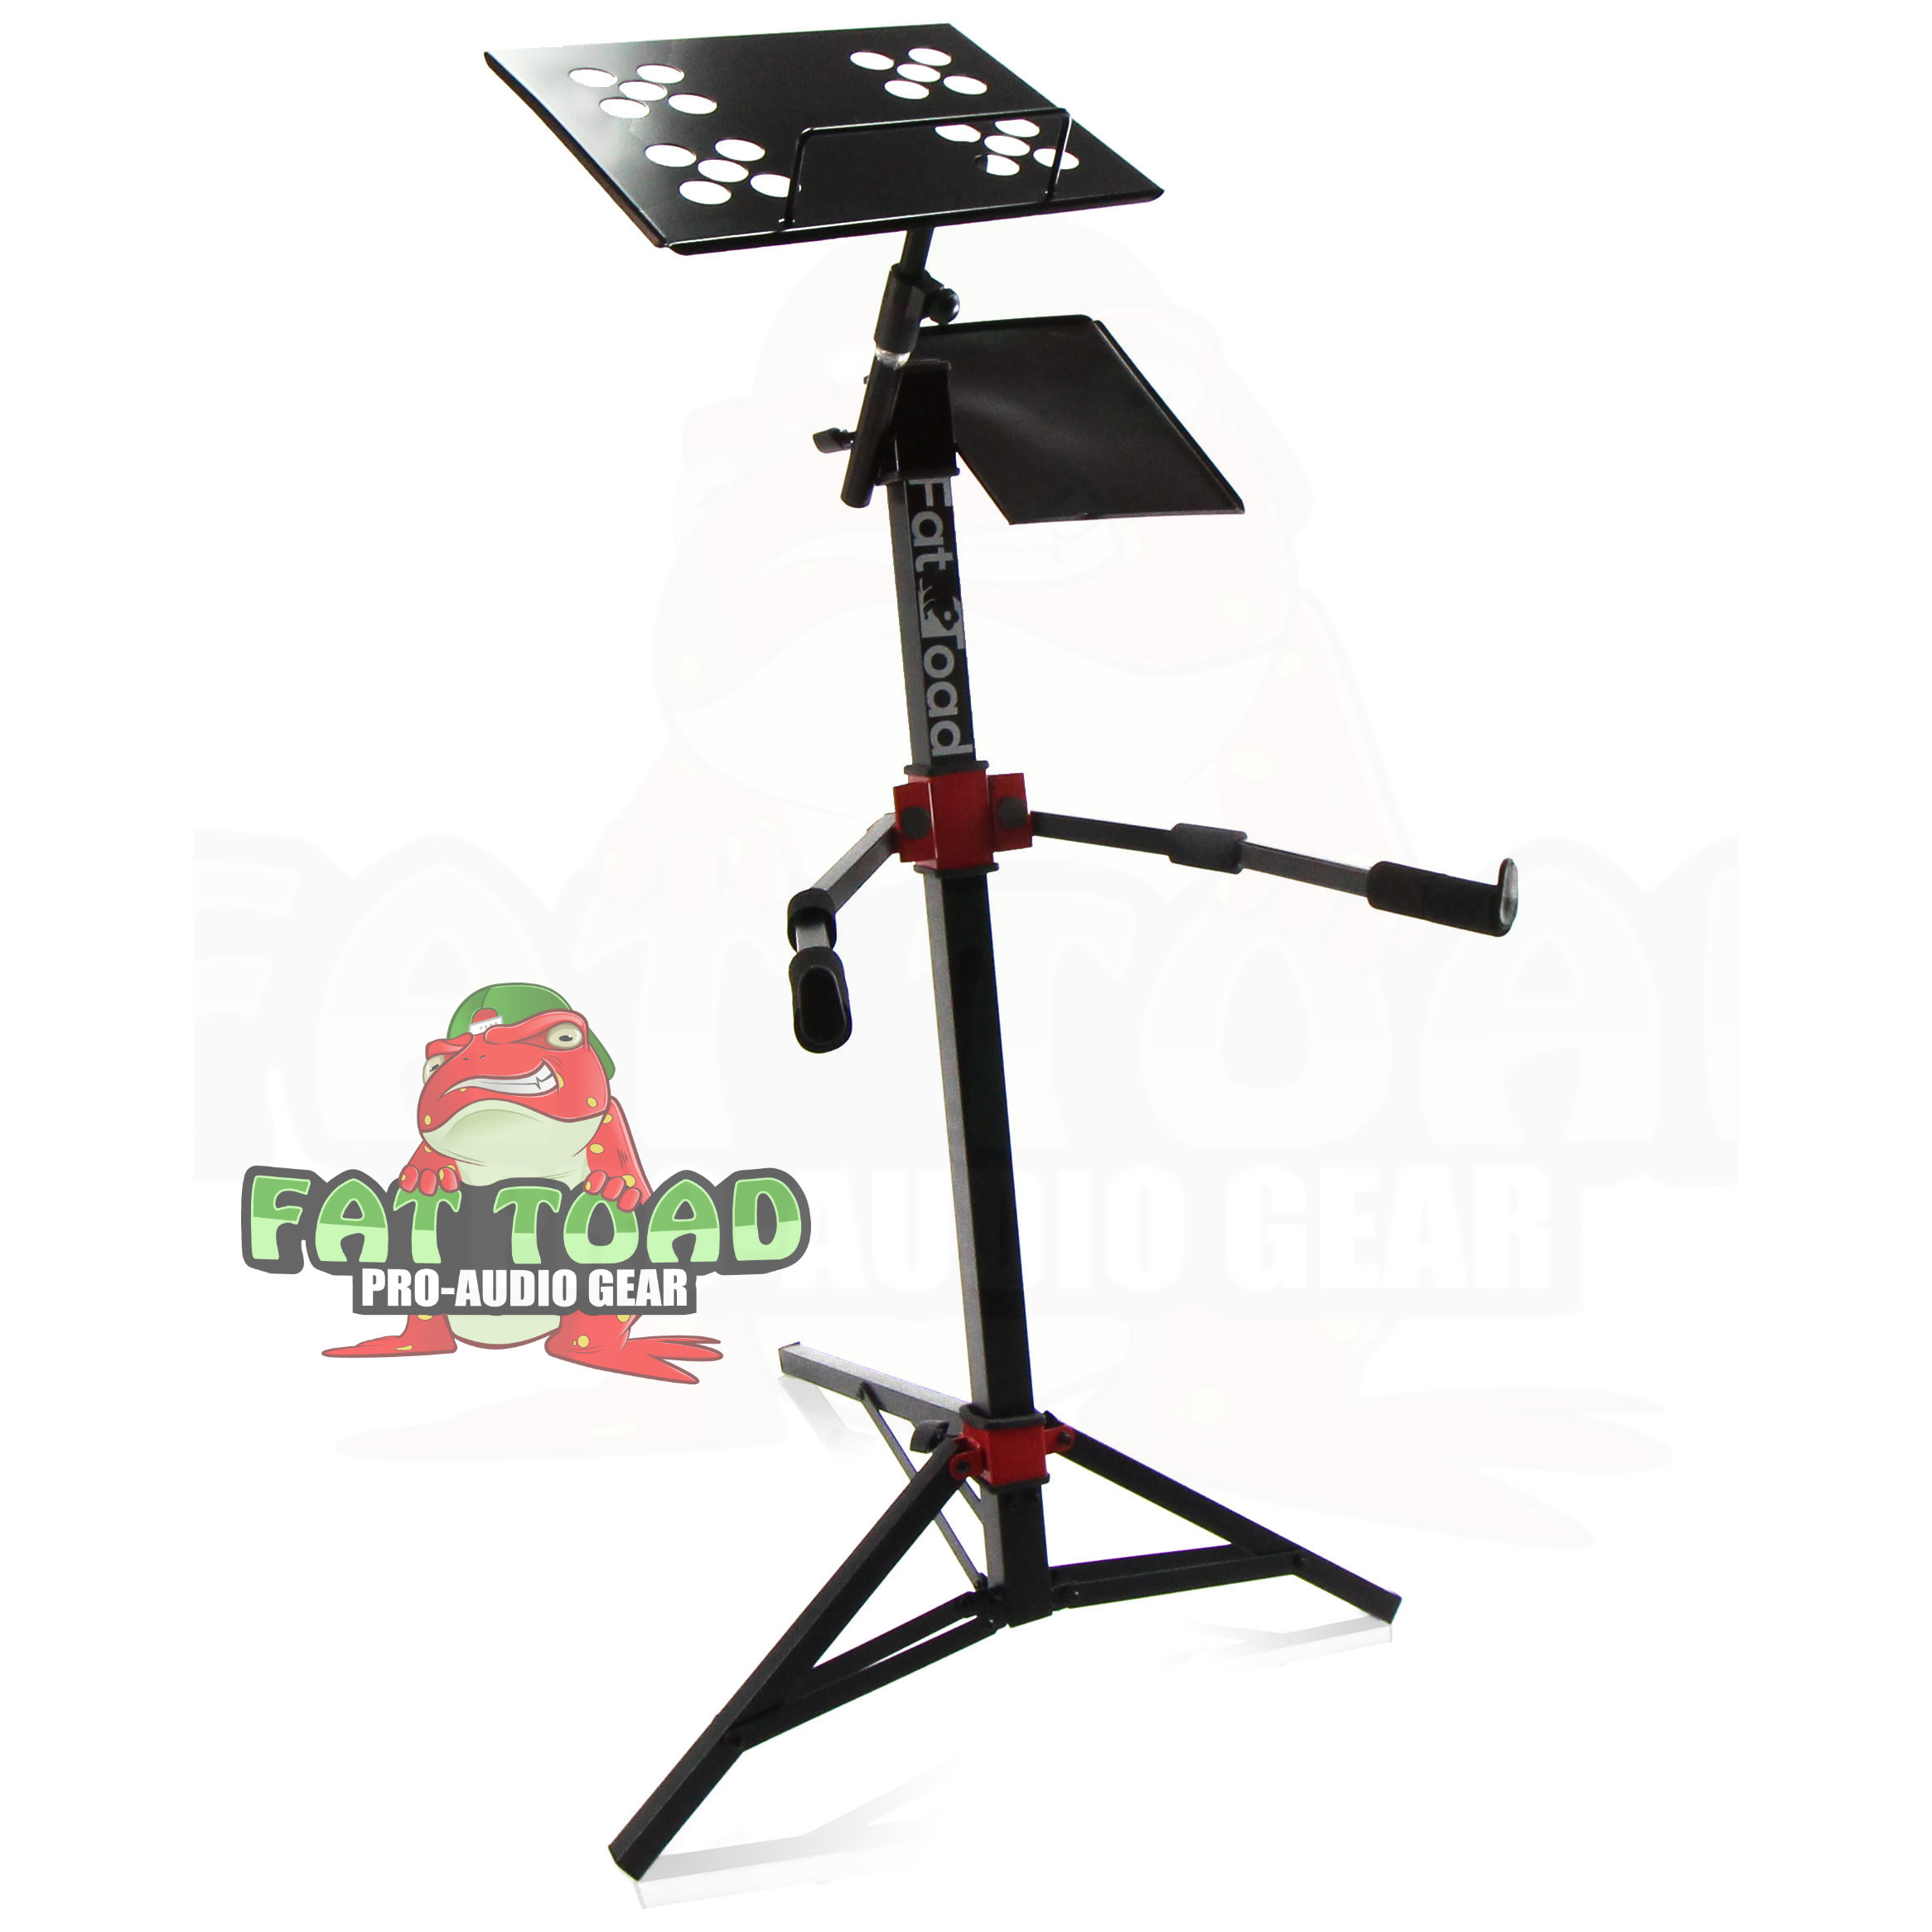 Double Laptop Stand For Djs Mobile Disc Jockey Pc Table Clamp